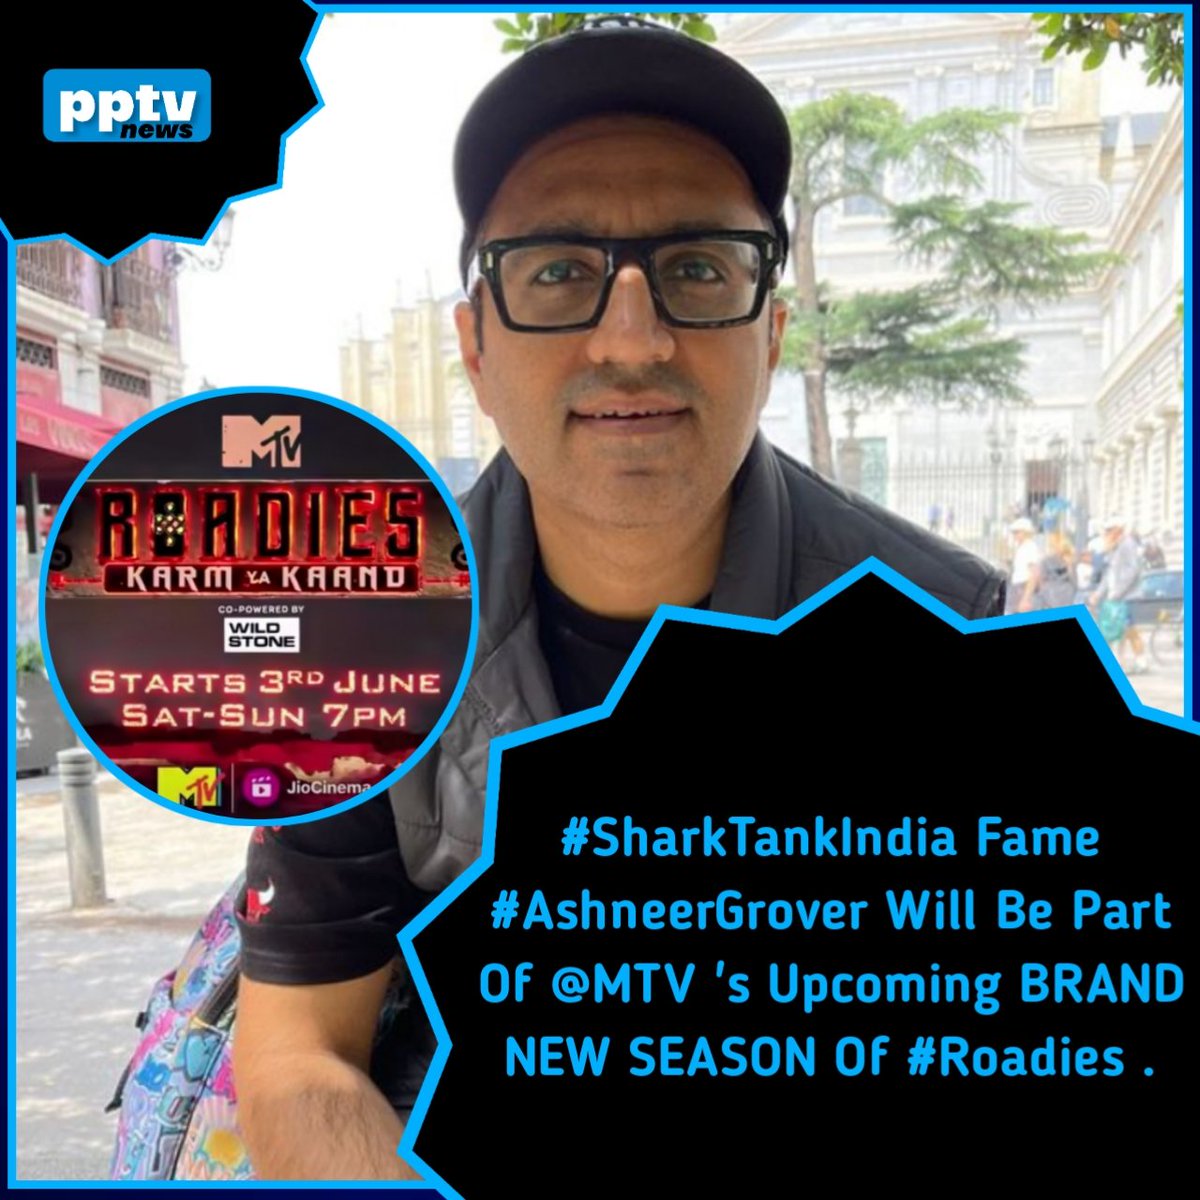 #SuperExclusive

#SharkTankIndia Fame #AshneerGrover Will Be Part Of #MTV 's Upcoming BRAND NEW SEASON Of #Roadies . 

@PPtvOfficial EXCLUSIVE #sonusood